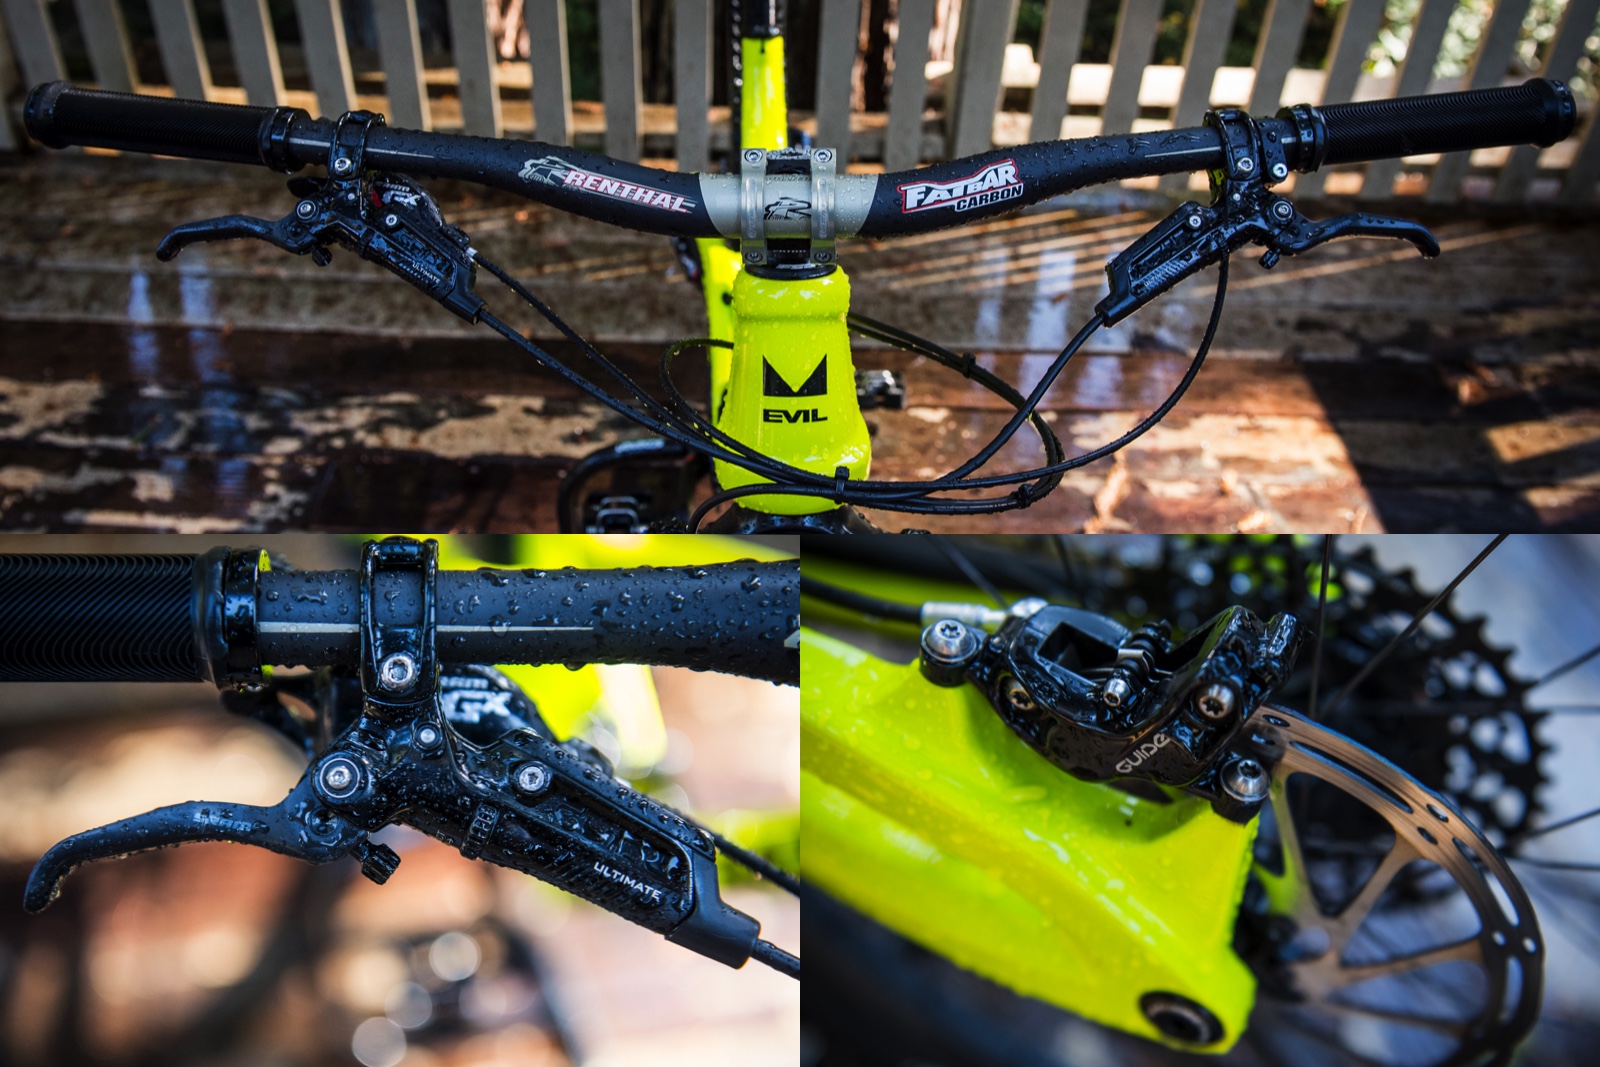 We almost forgot about spec. Renthal Apex stem in 50mm length. 20mm rise Renthal Fatbar Carbon at full 780mm width. Guide Ultimates are the best brakes we've ridden to date so we're happy to have them on this bike. Sensus Swayze Grips.